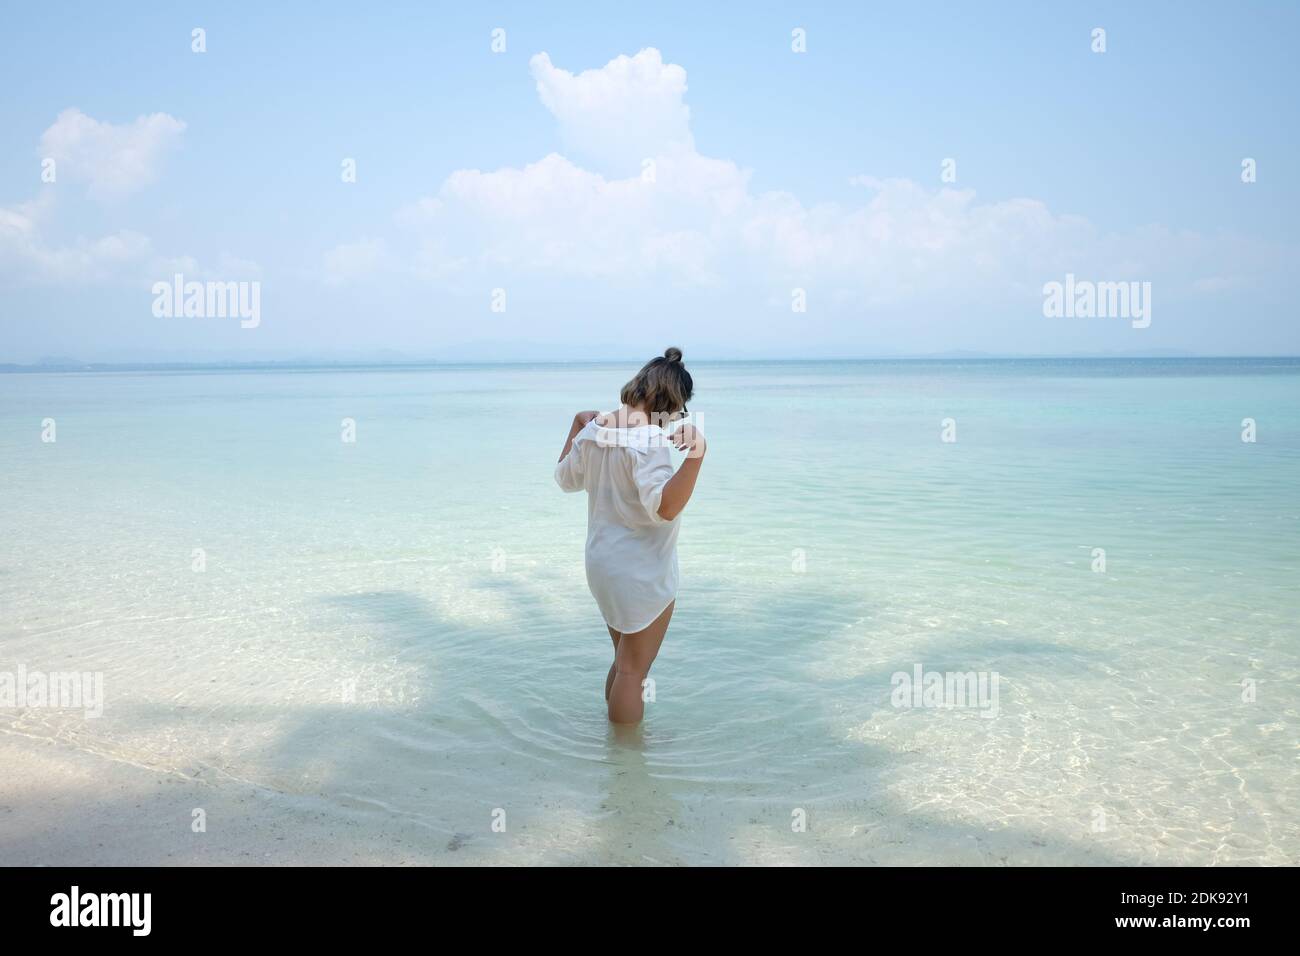 Woman Standing On Shore At Beach Against Sky Stock Photo